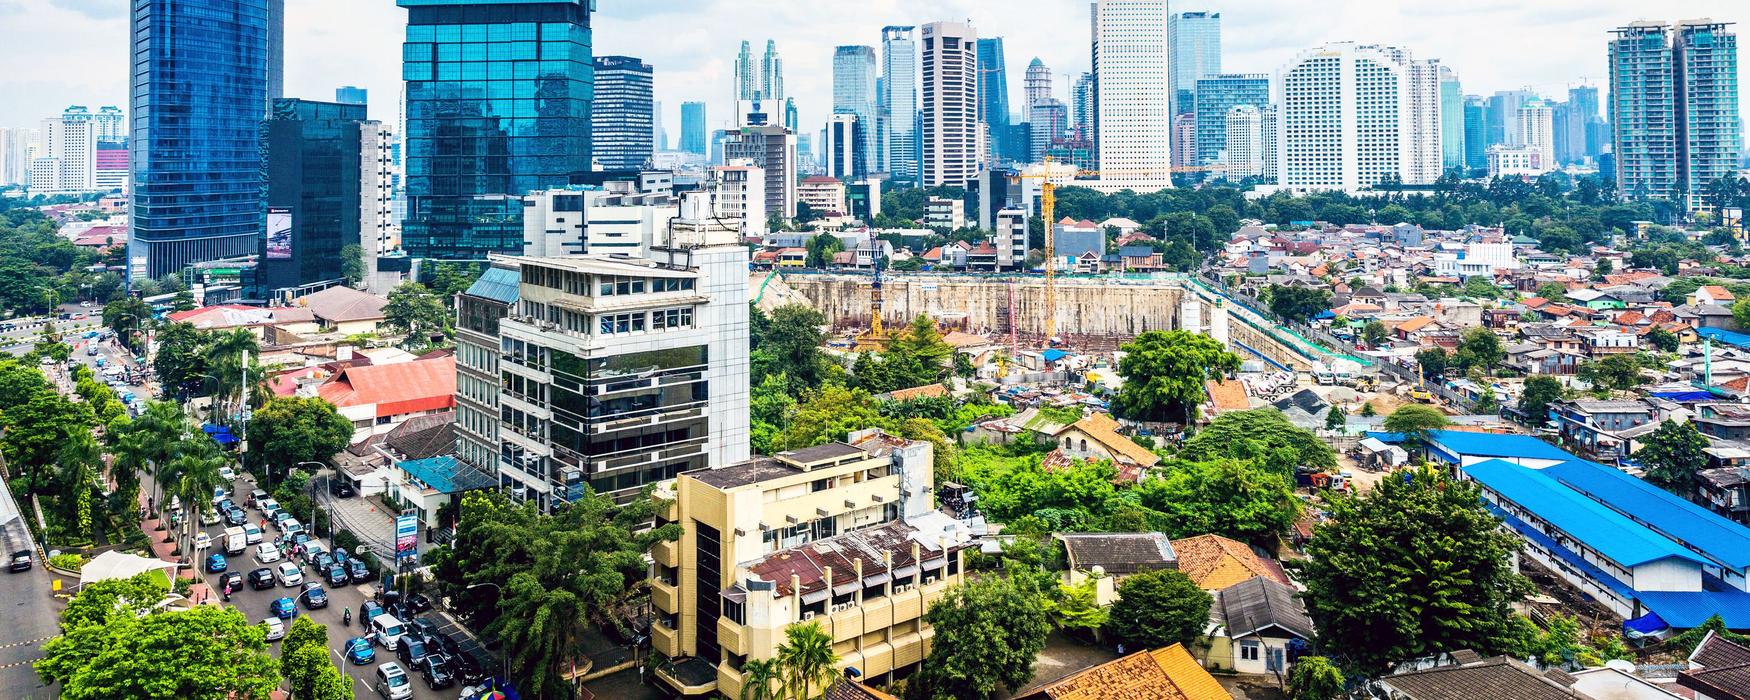 Cheap Flights from Singapore to Jakarta from S$ 97 - KAYAK